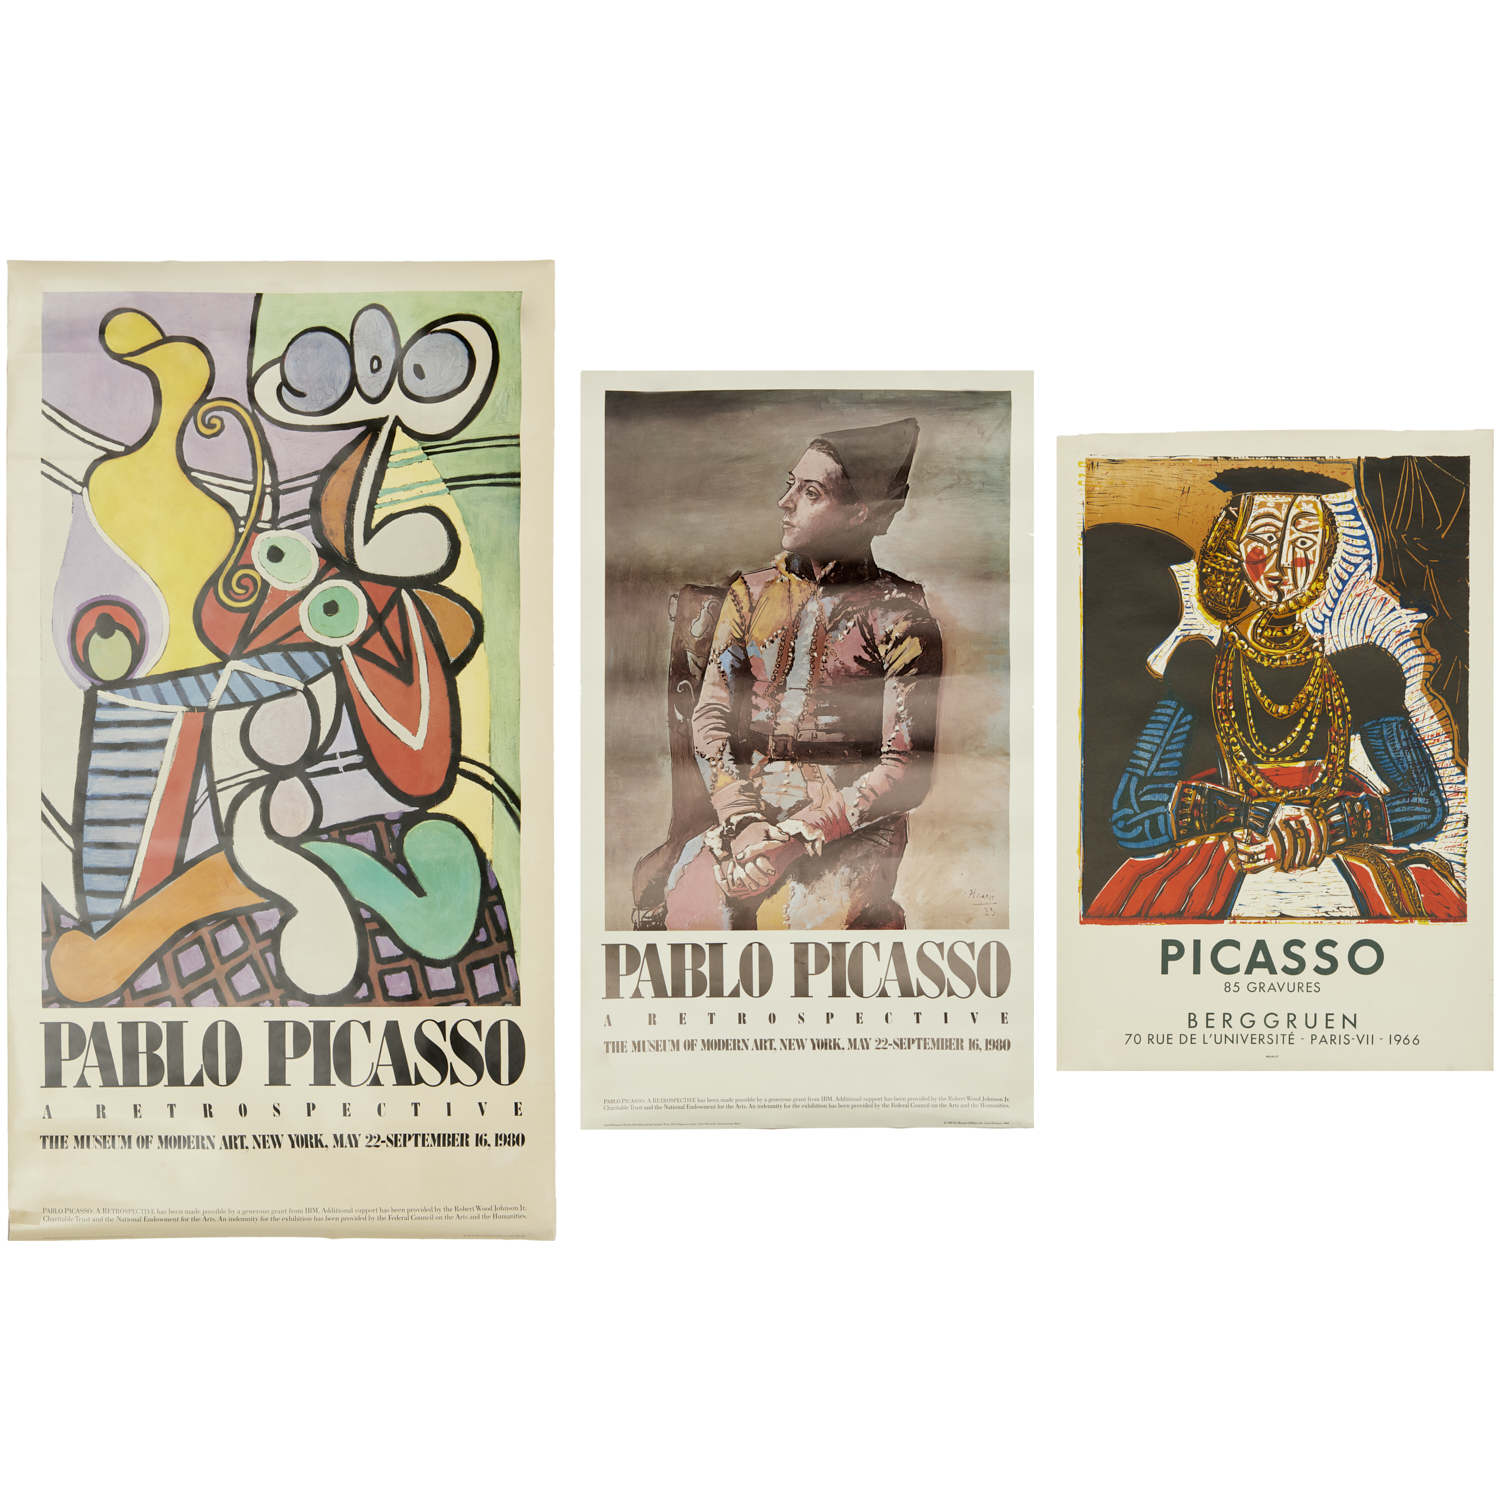 Pablo Picasso, (3) exhibition posters | Millea Brothers